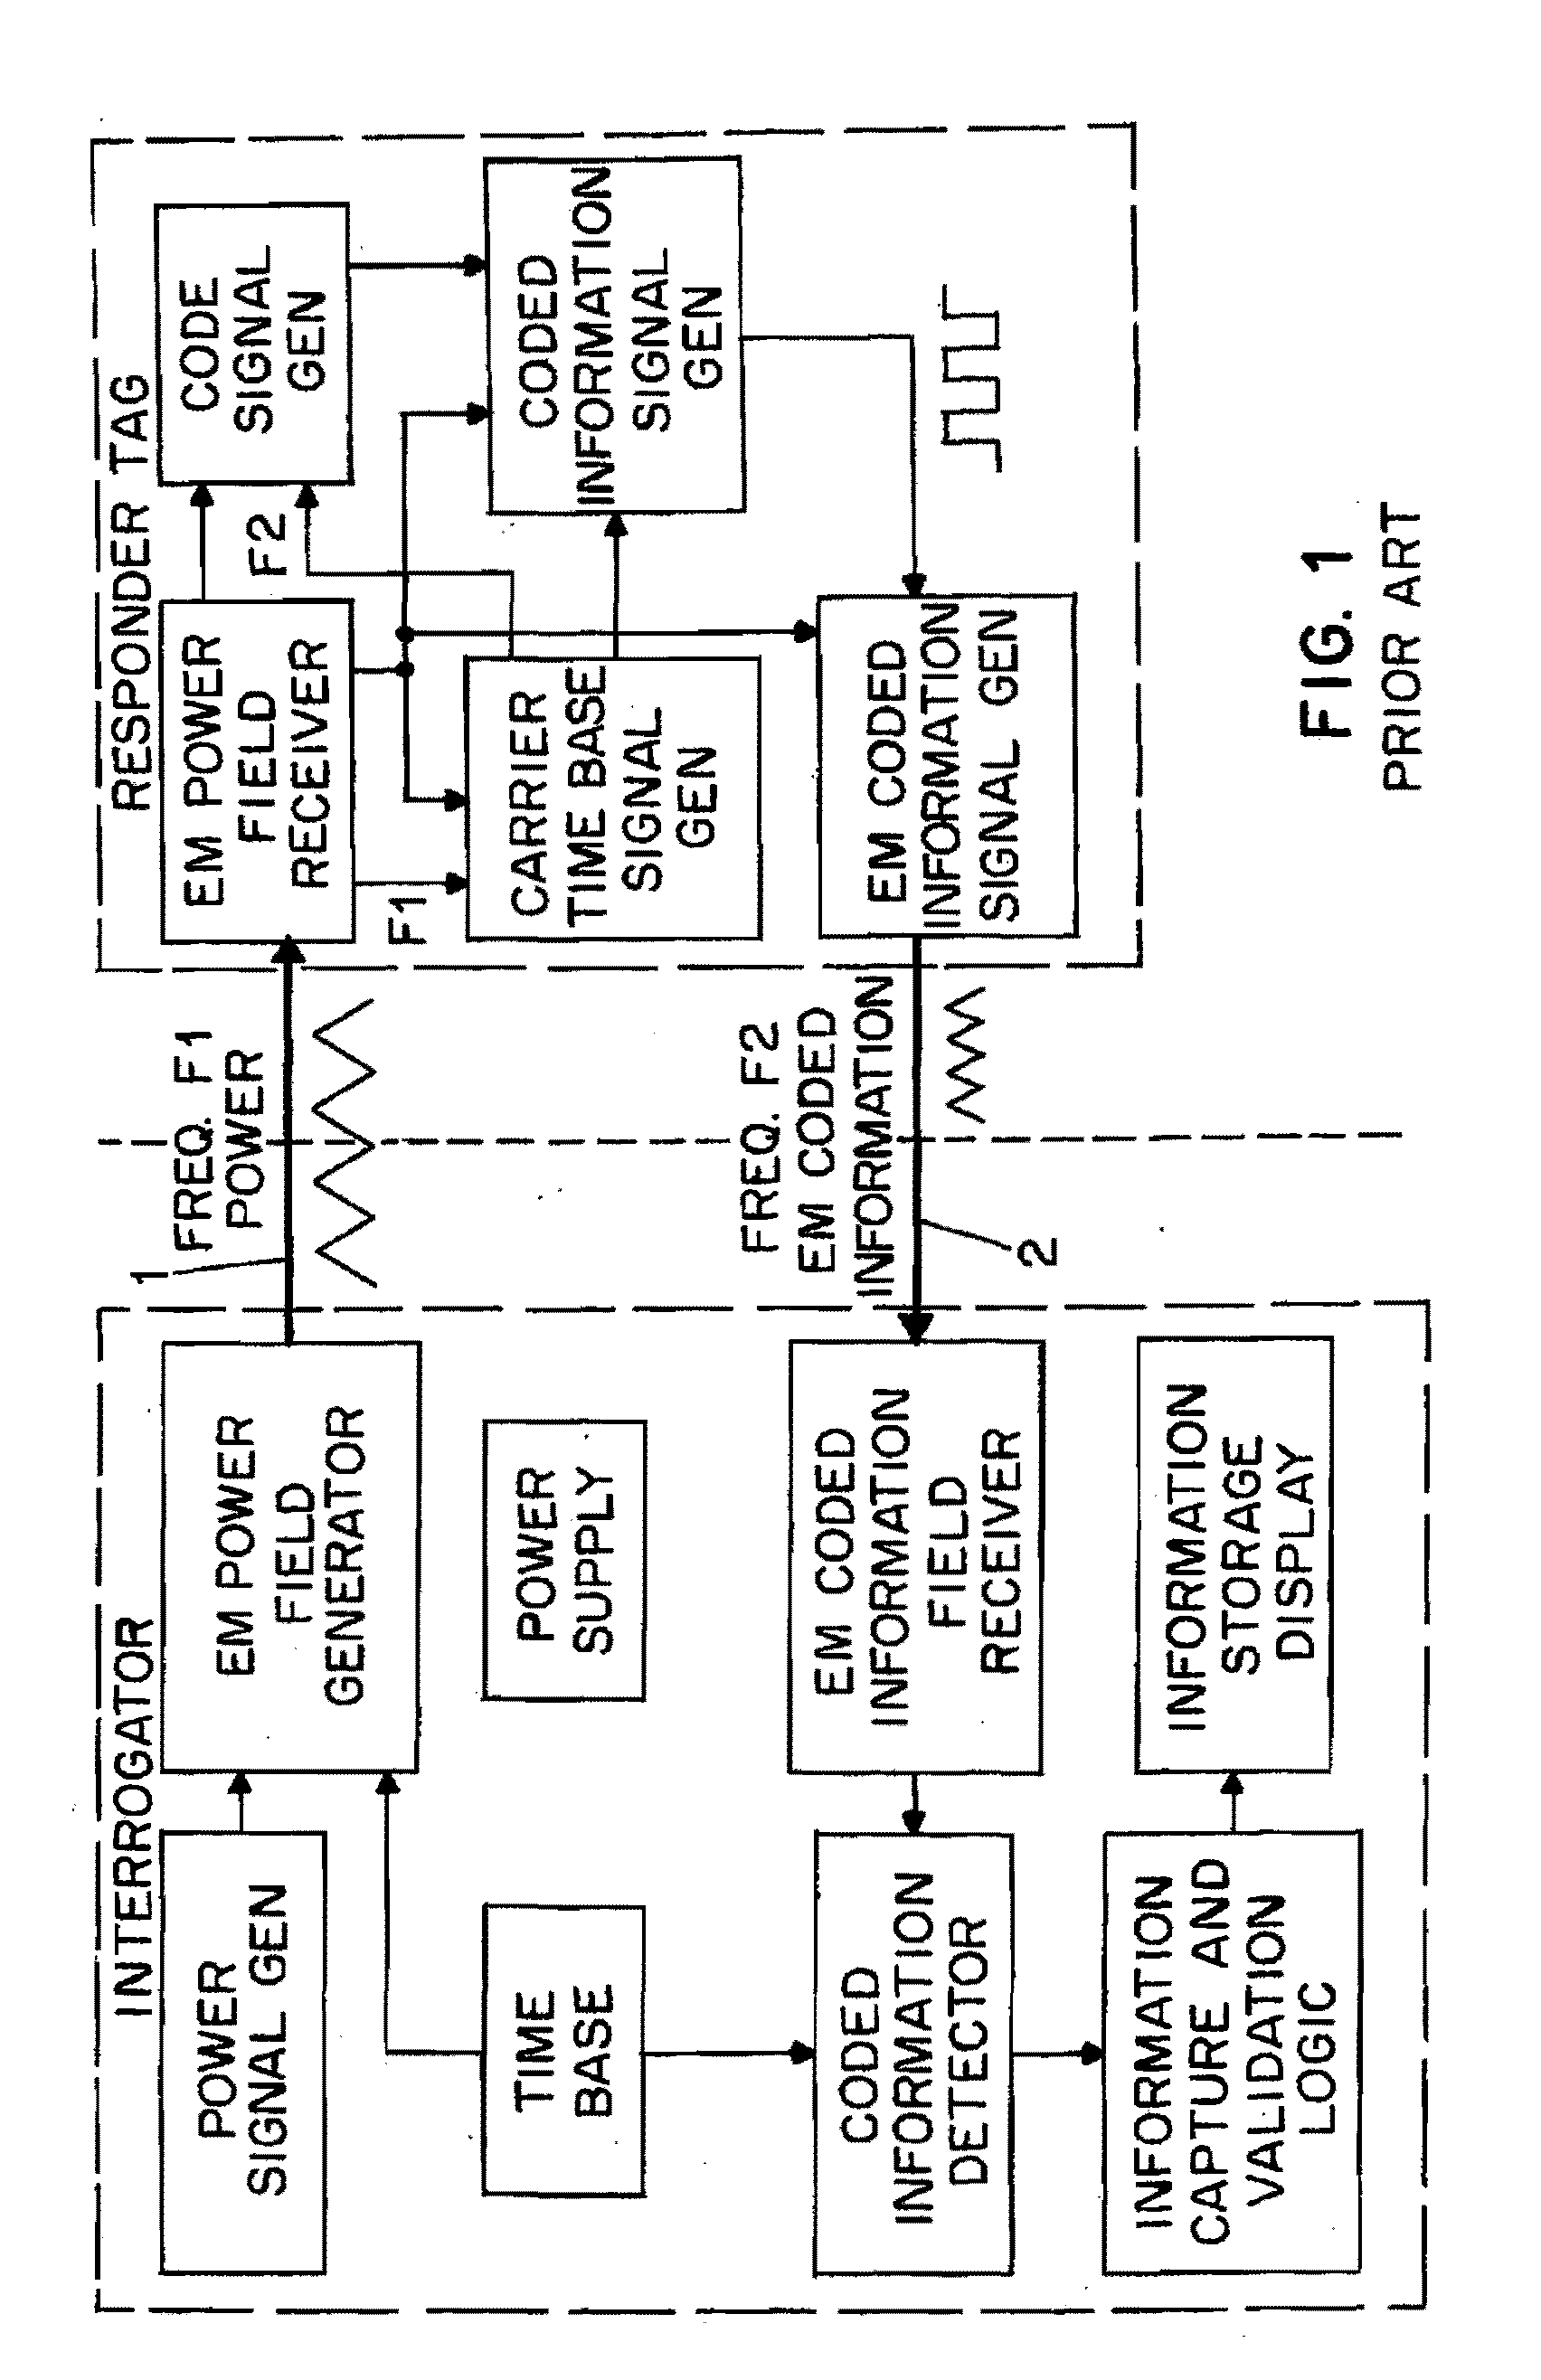 Energy Harvesting for Low Frequency Inductive Tagging